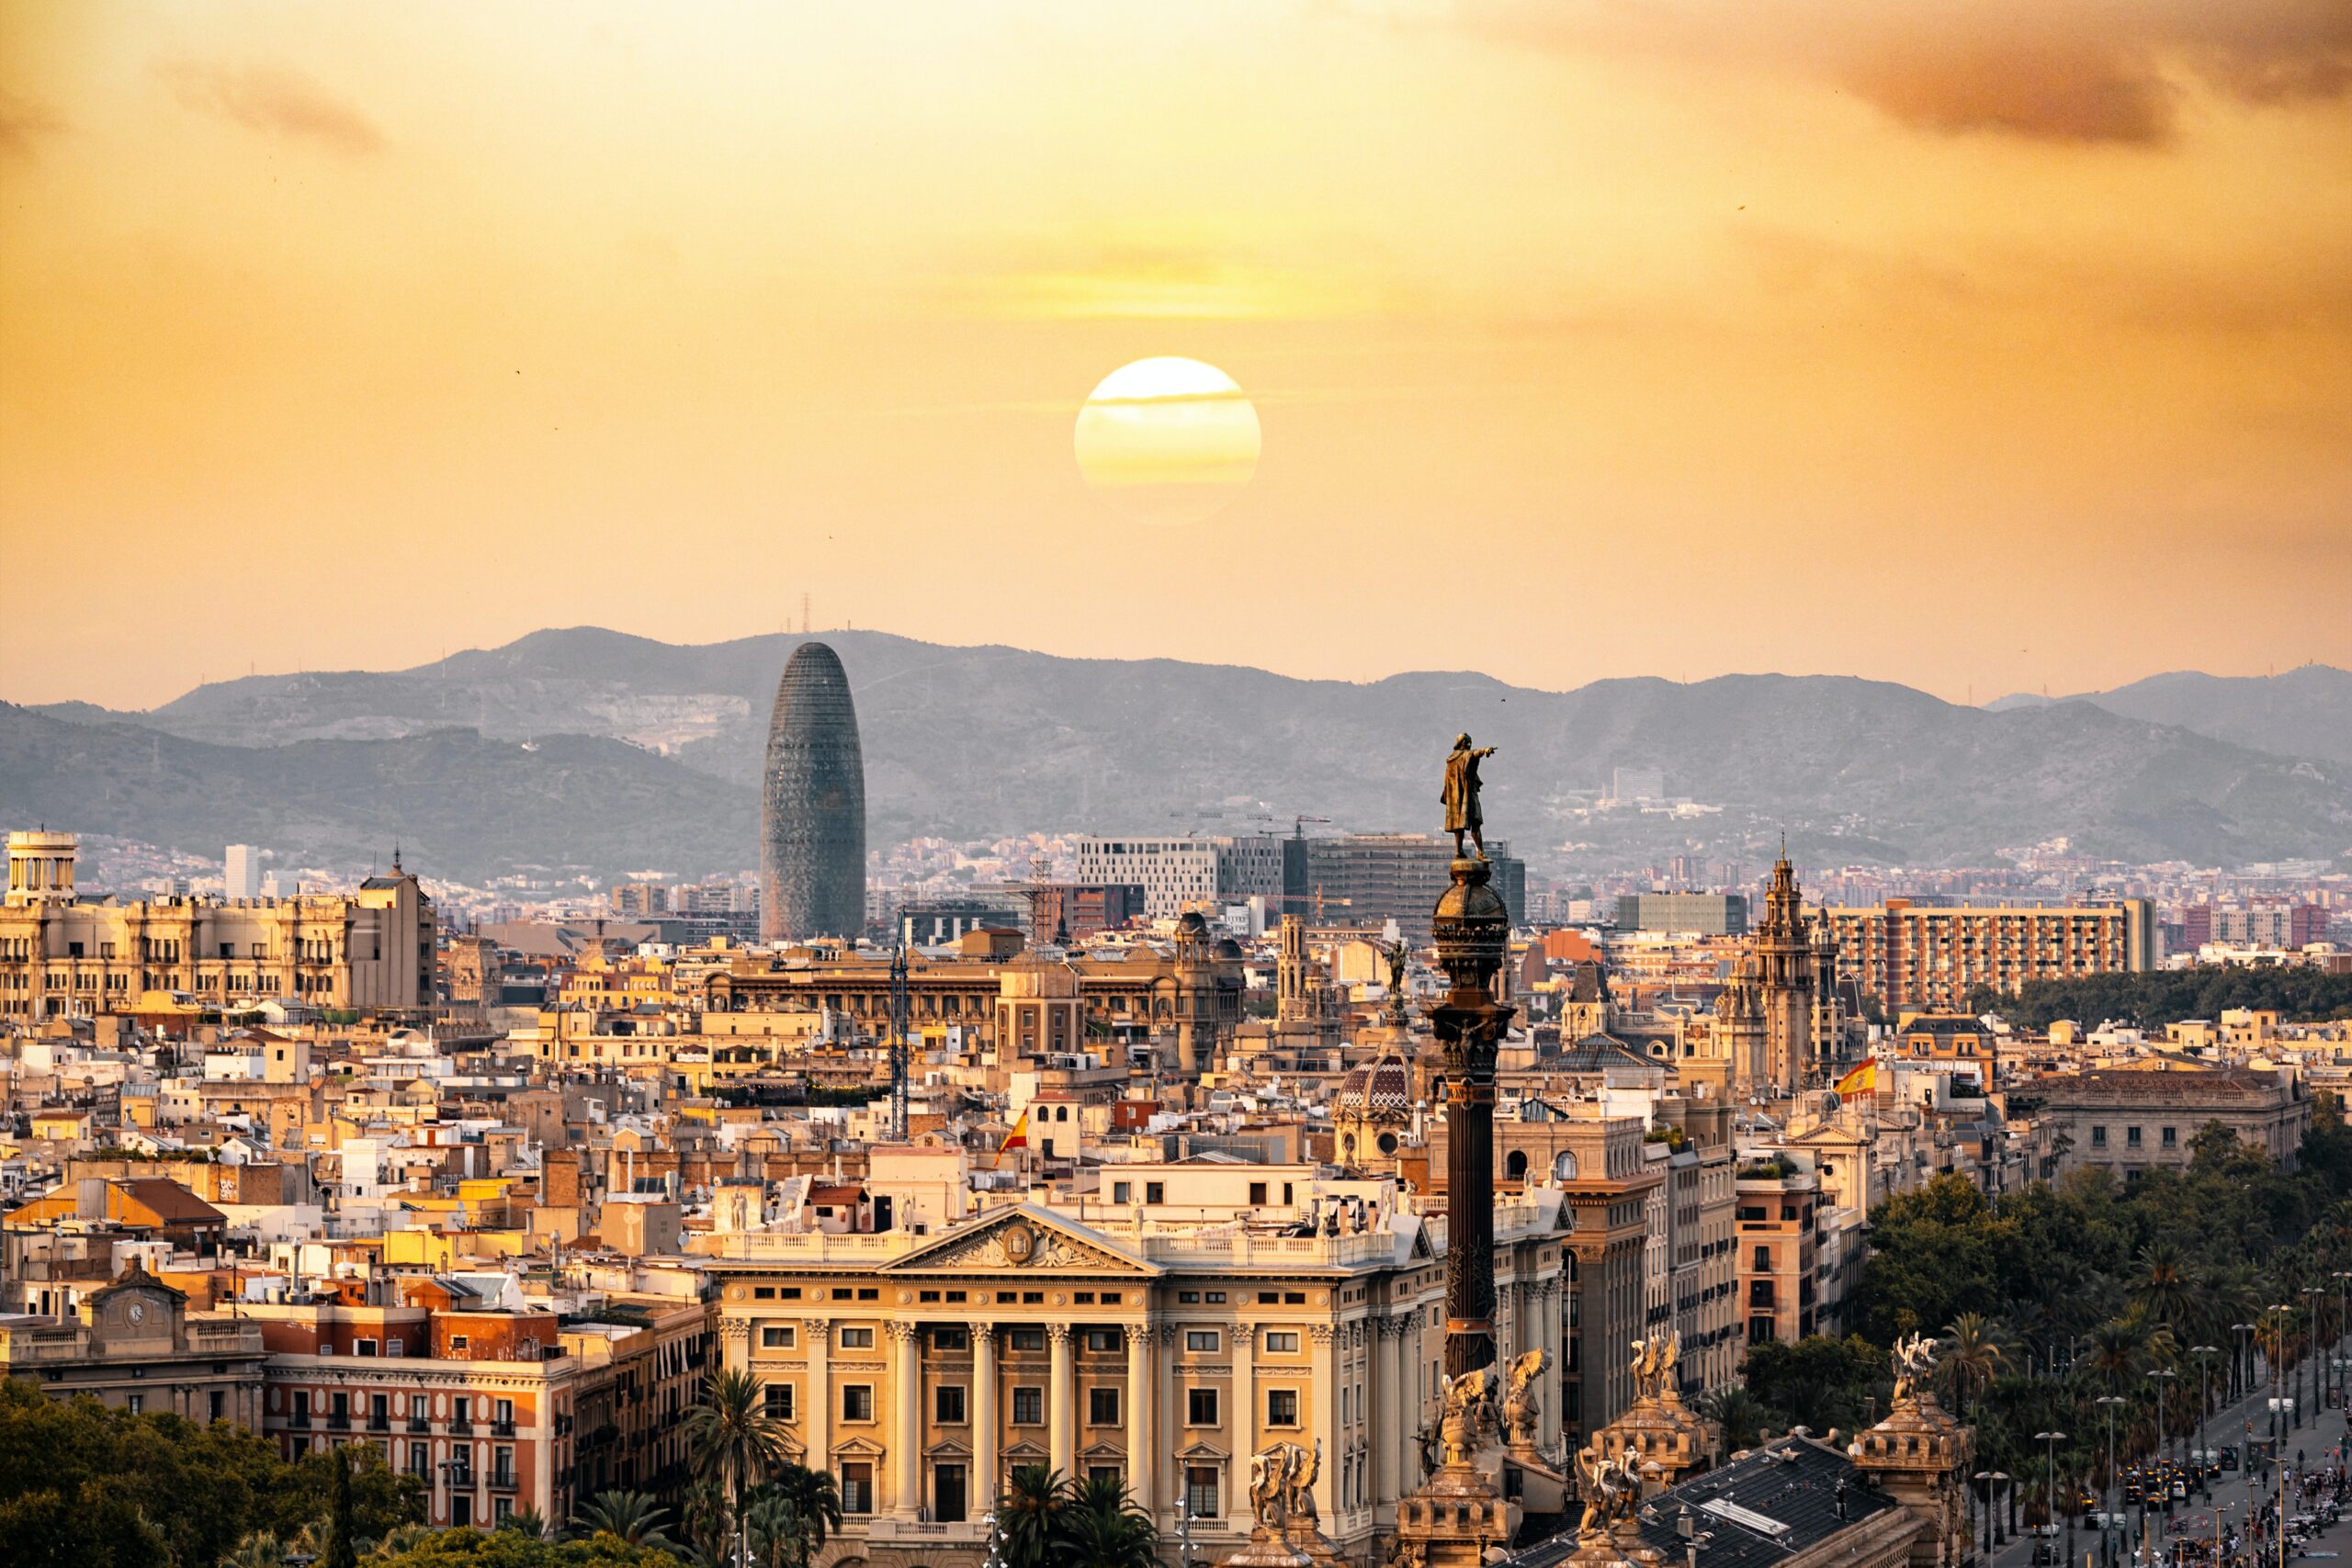 Sunset in Barcelona overlooking mountains and city skyline